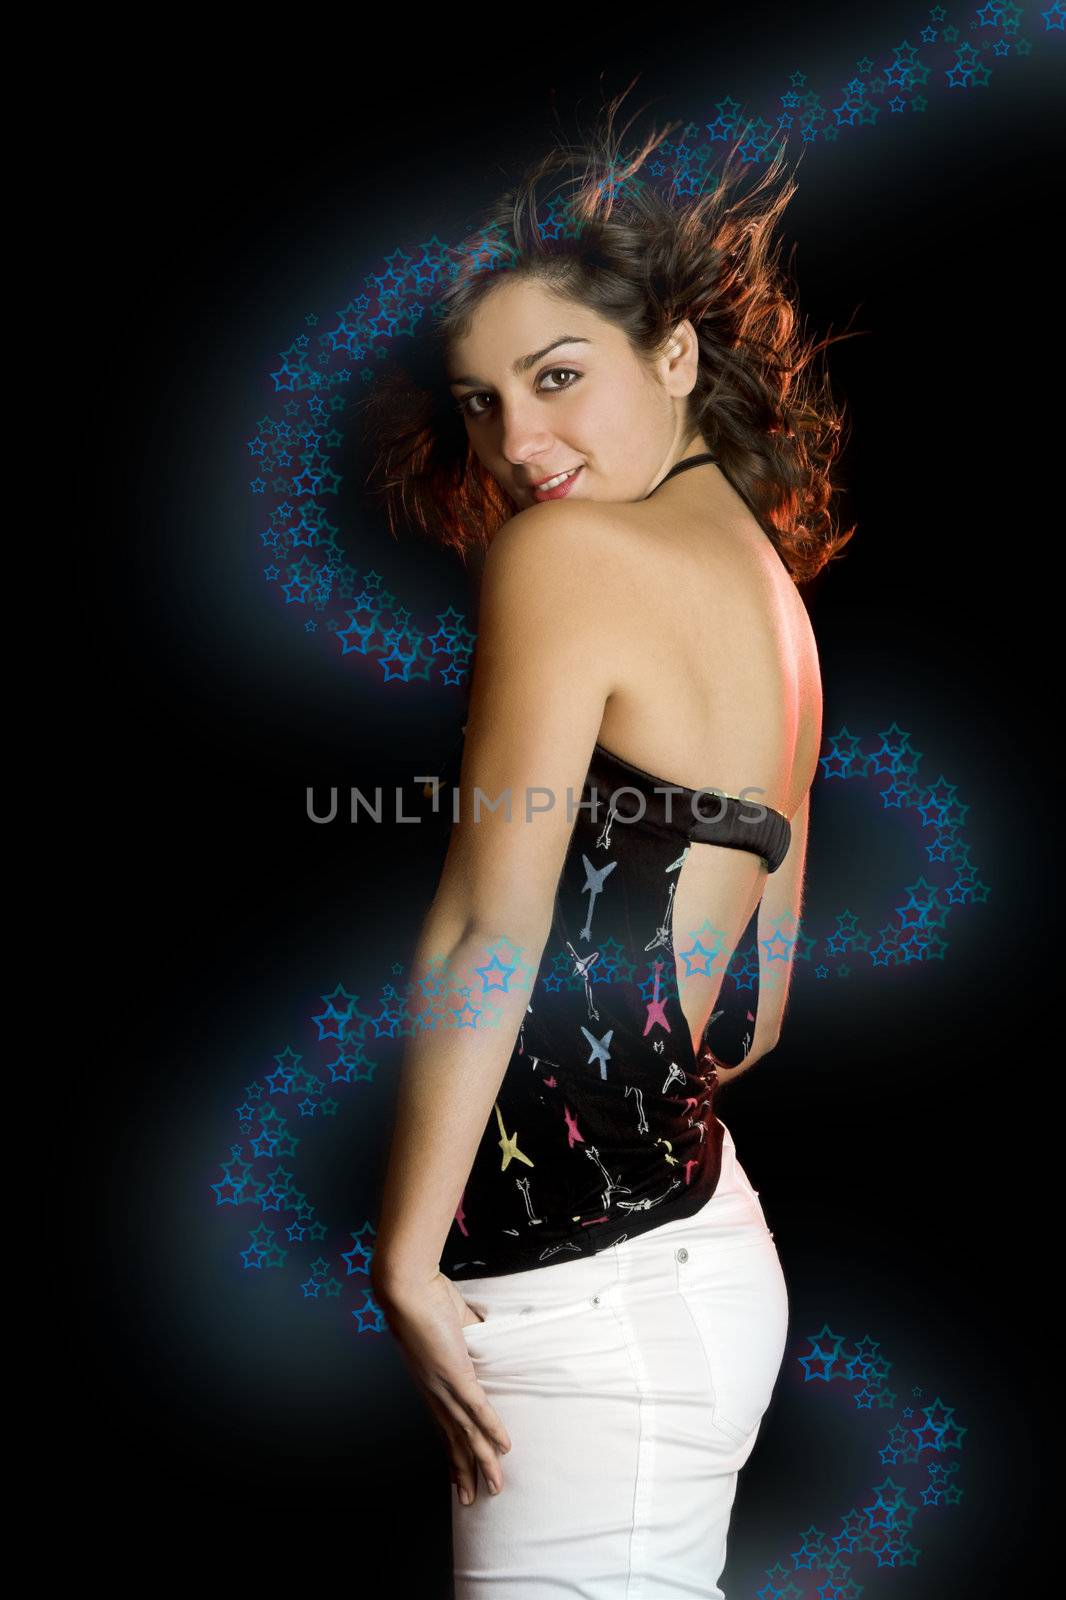 Portrait of a beautiful young and attractive woman on a black background - (Star effects surrounding the model)